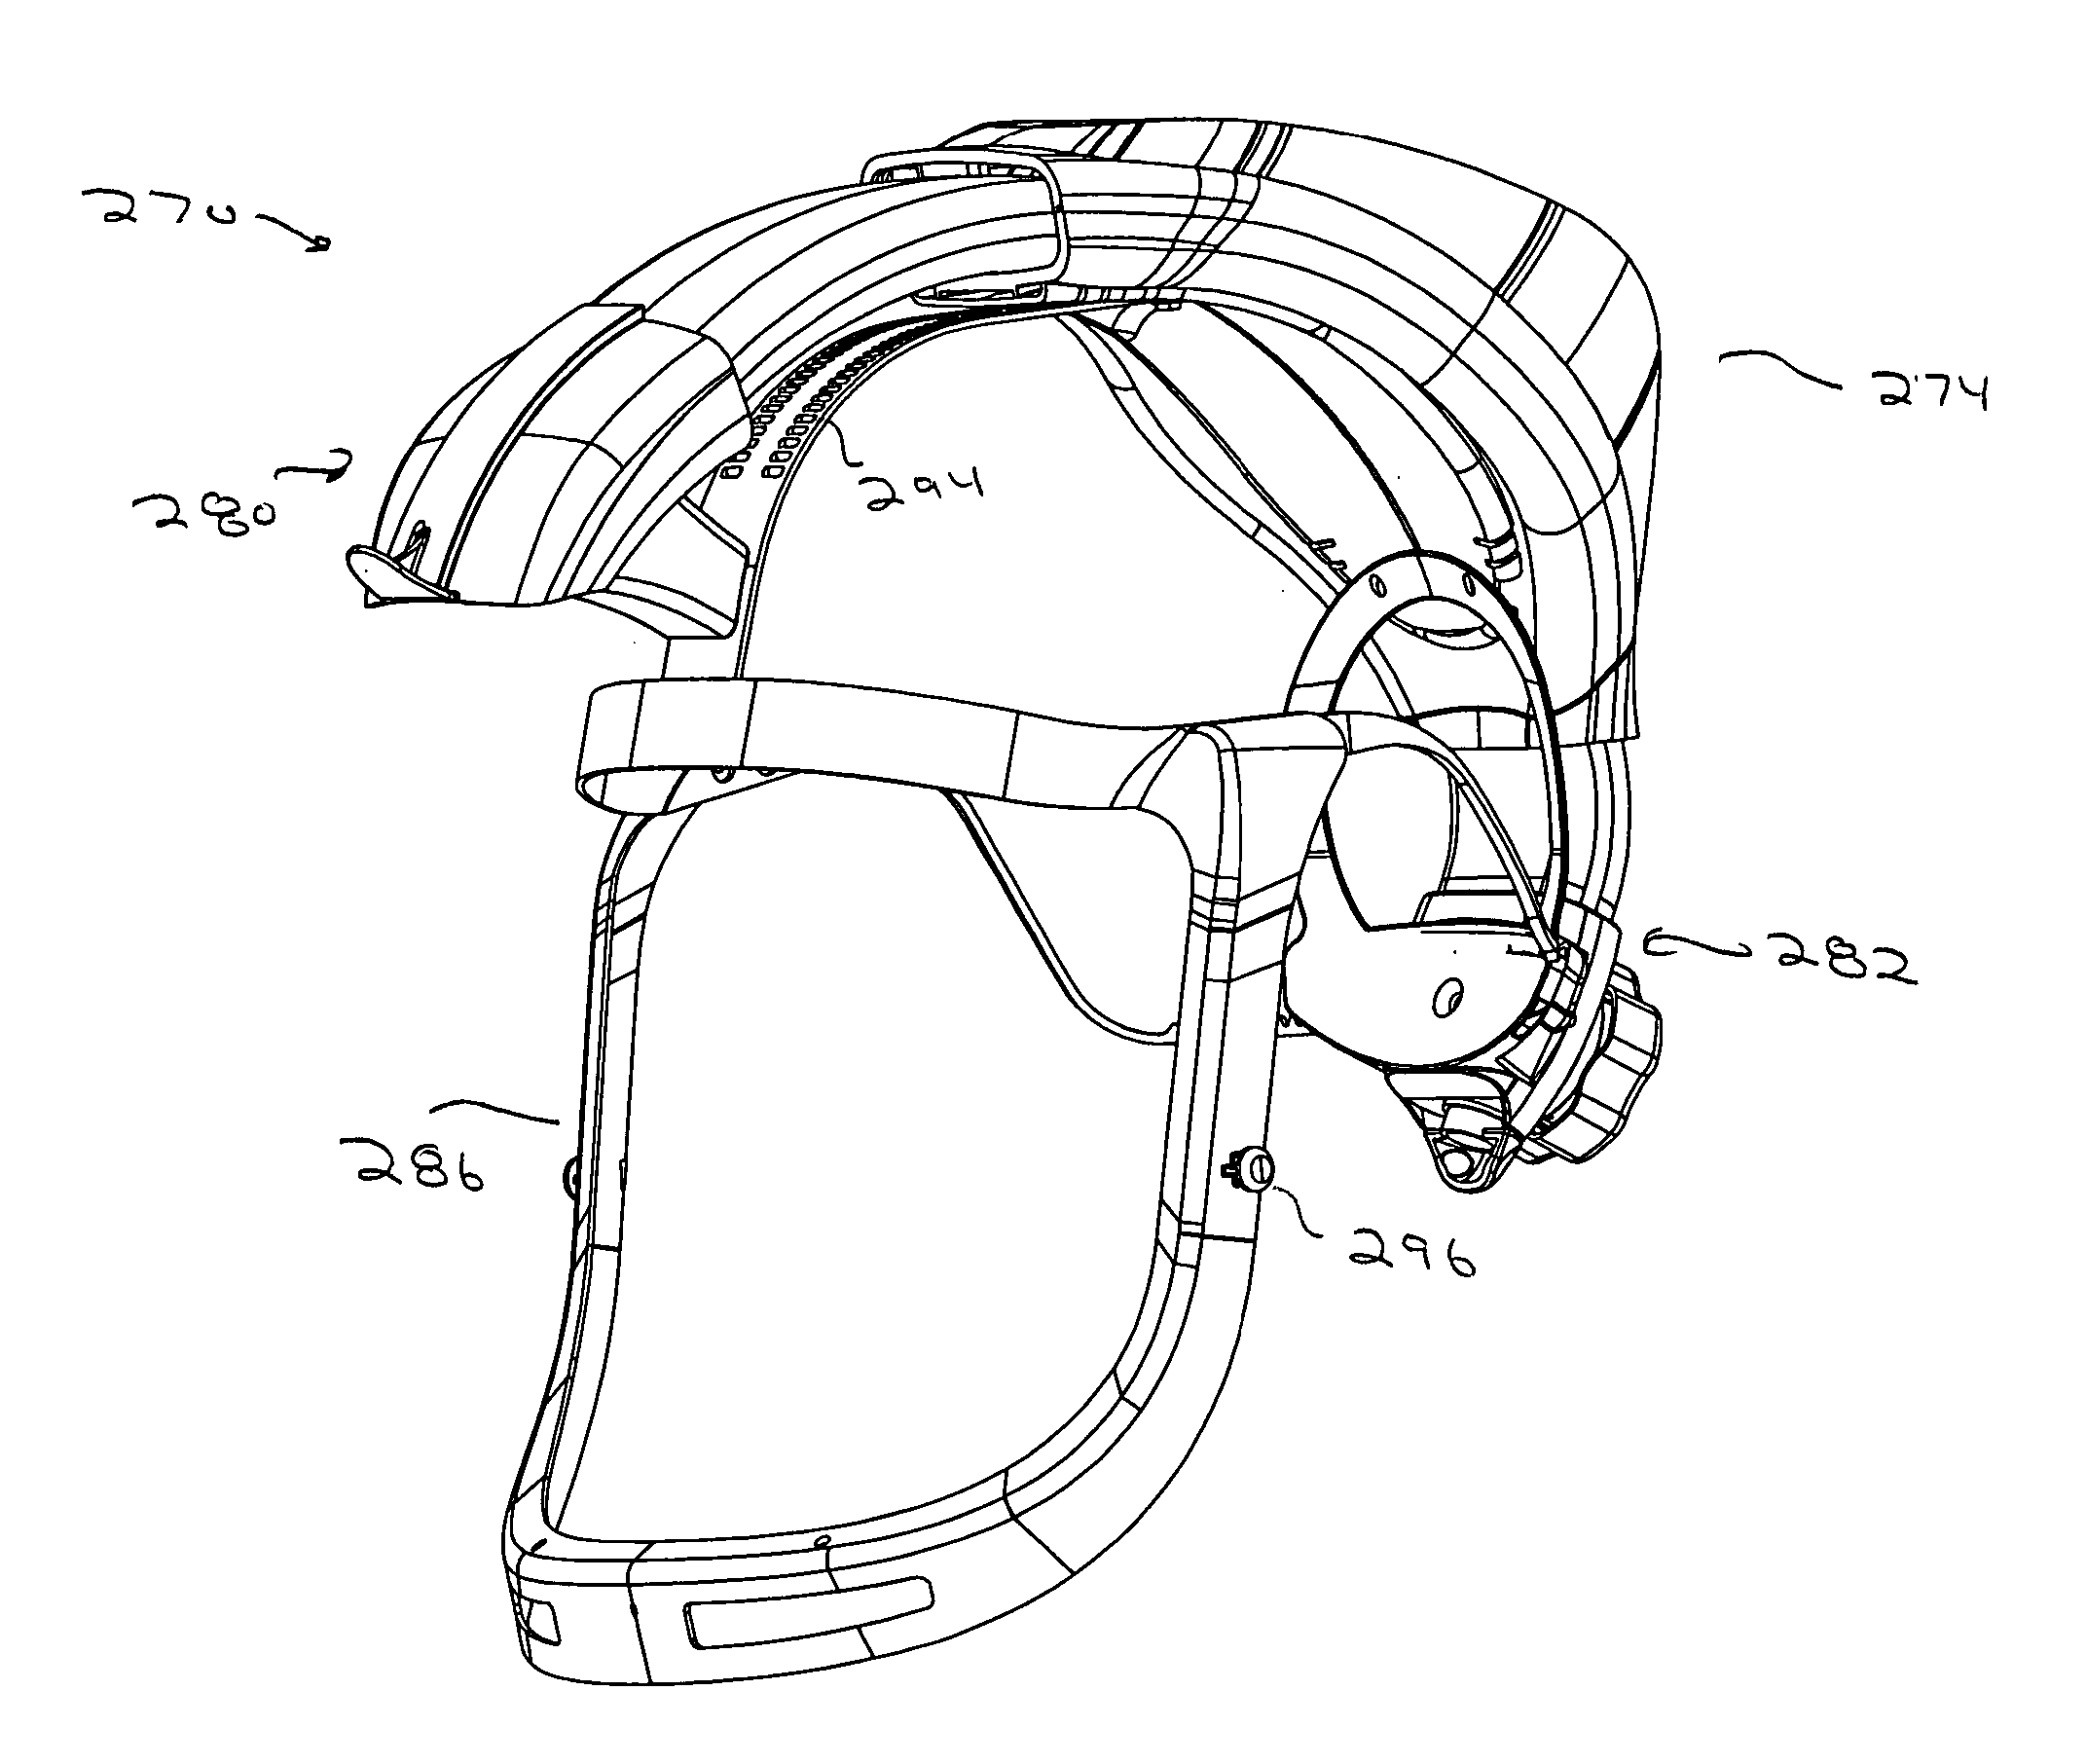 Head unit for a medical/surgical personal protection system with a head band and a ventilation unit that is adjustably position relative to the head band